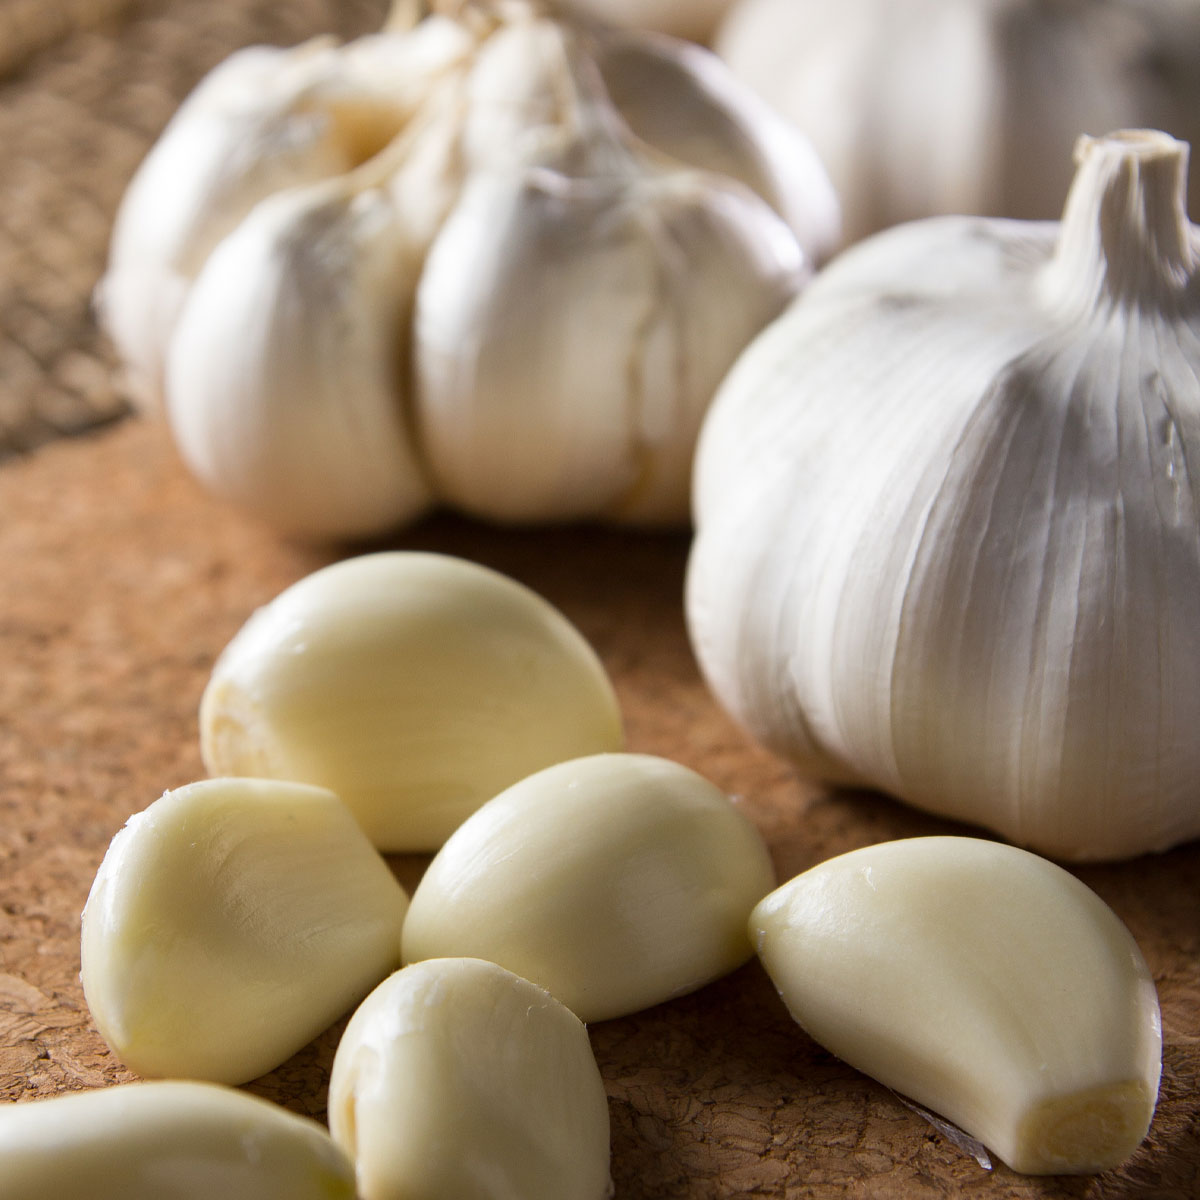 The Powerful Health Benefits of Quercetin in Garlic